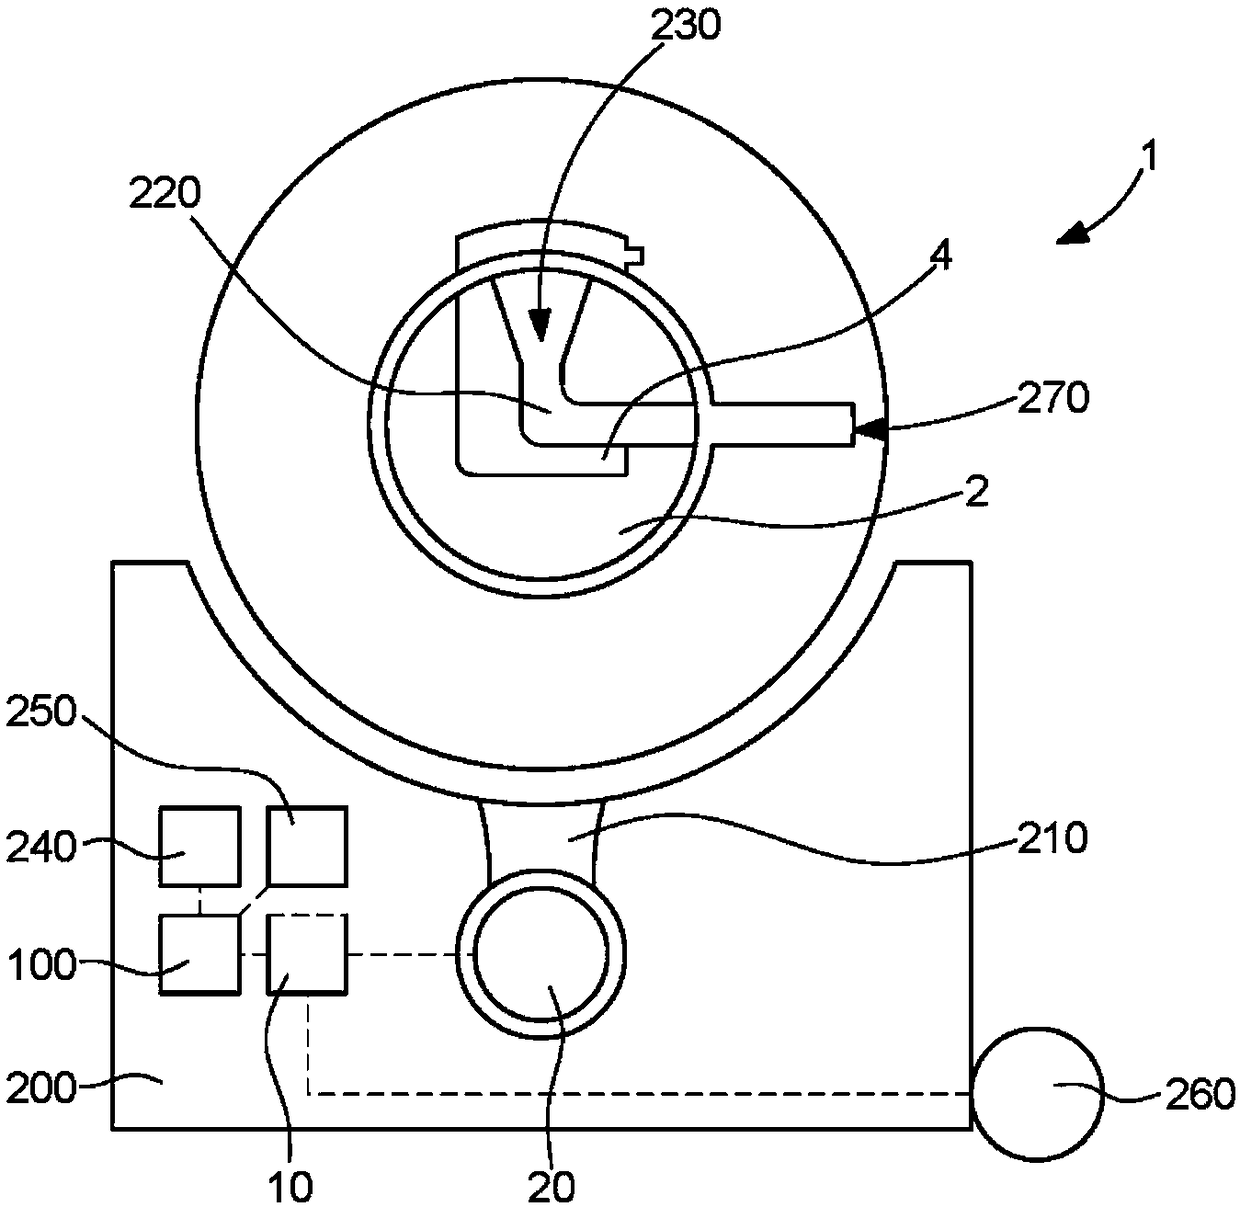 Intelligent device for winding watches